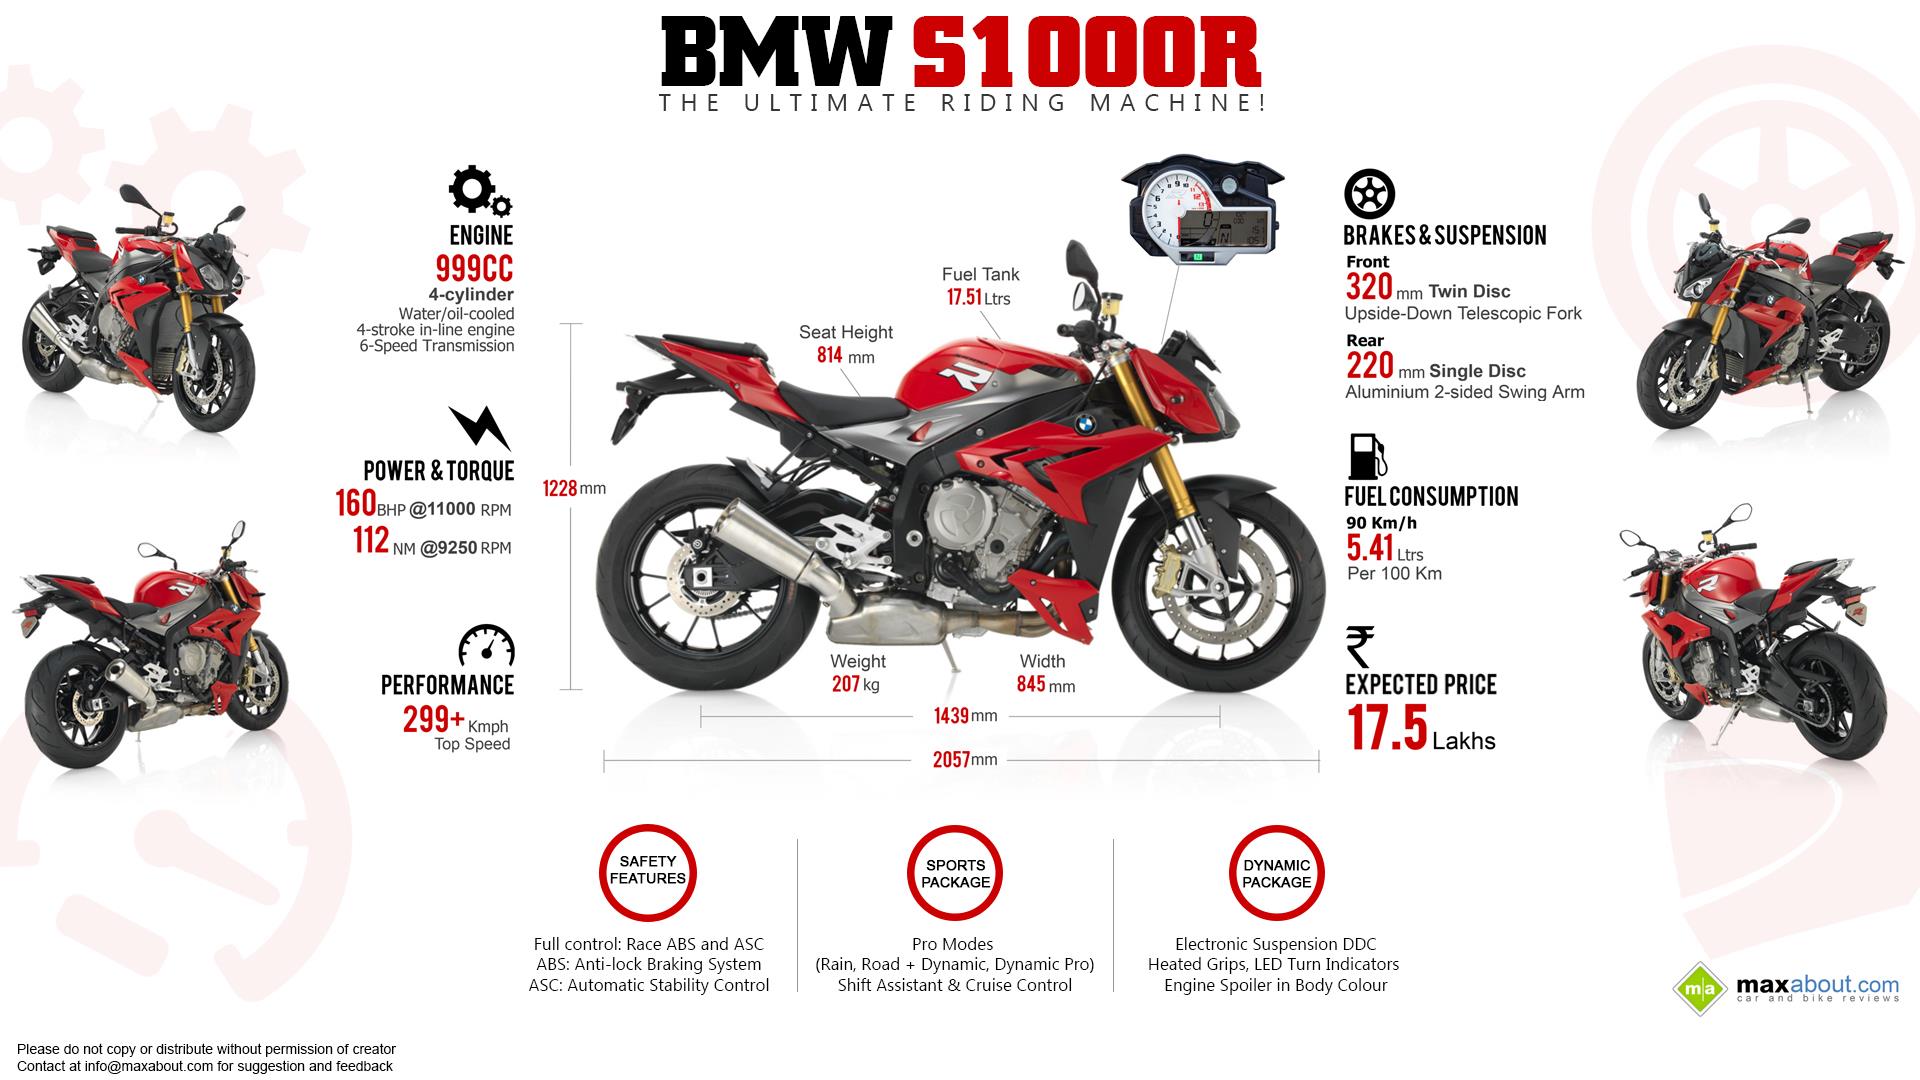 Bmw the ultimate riding machine #4